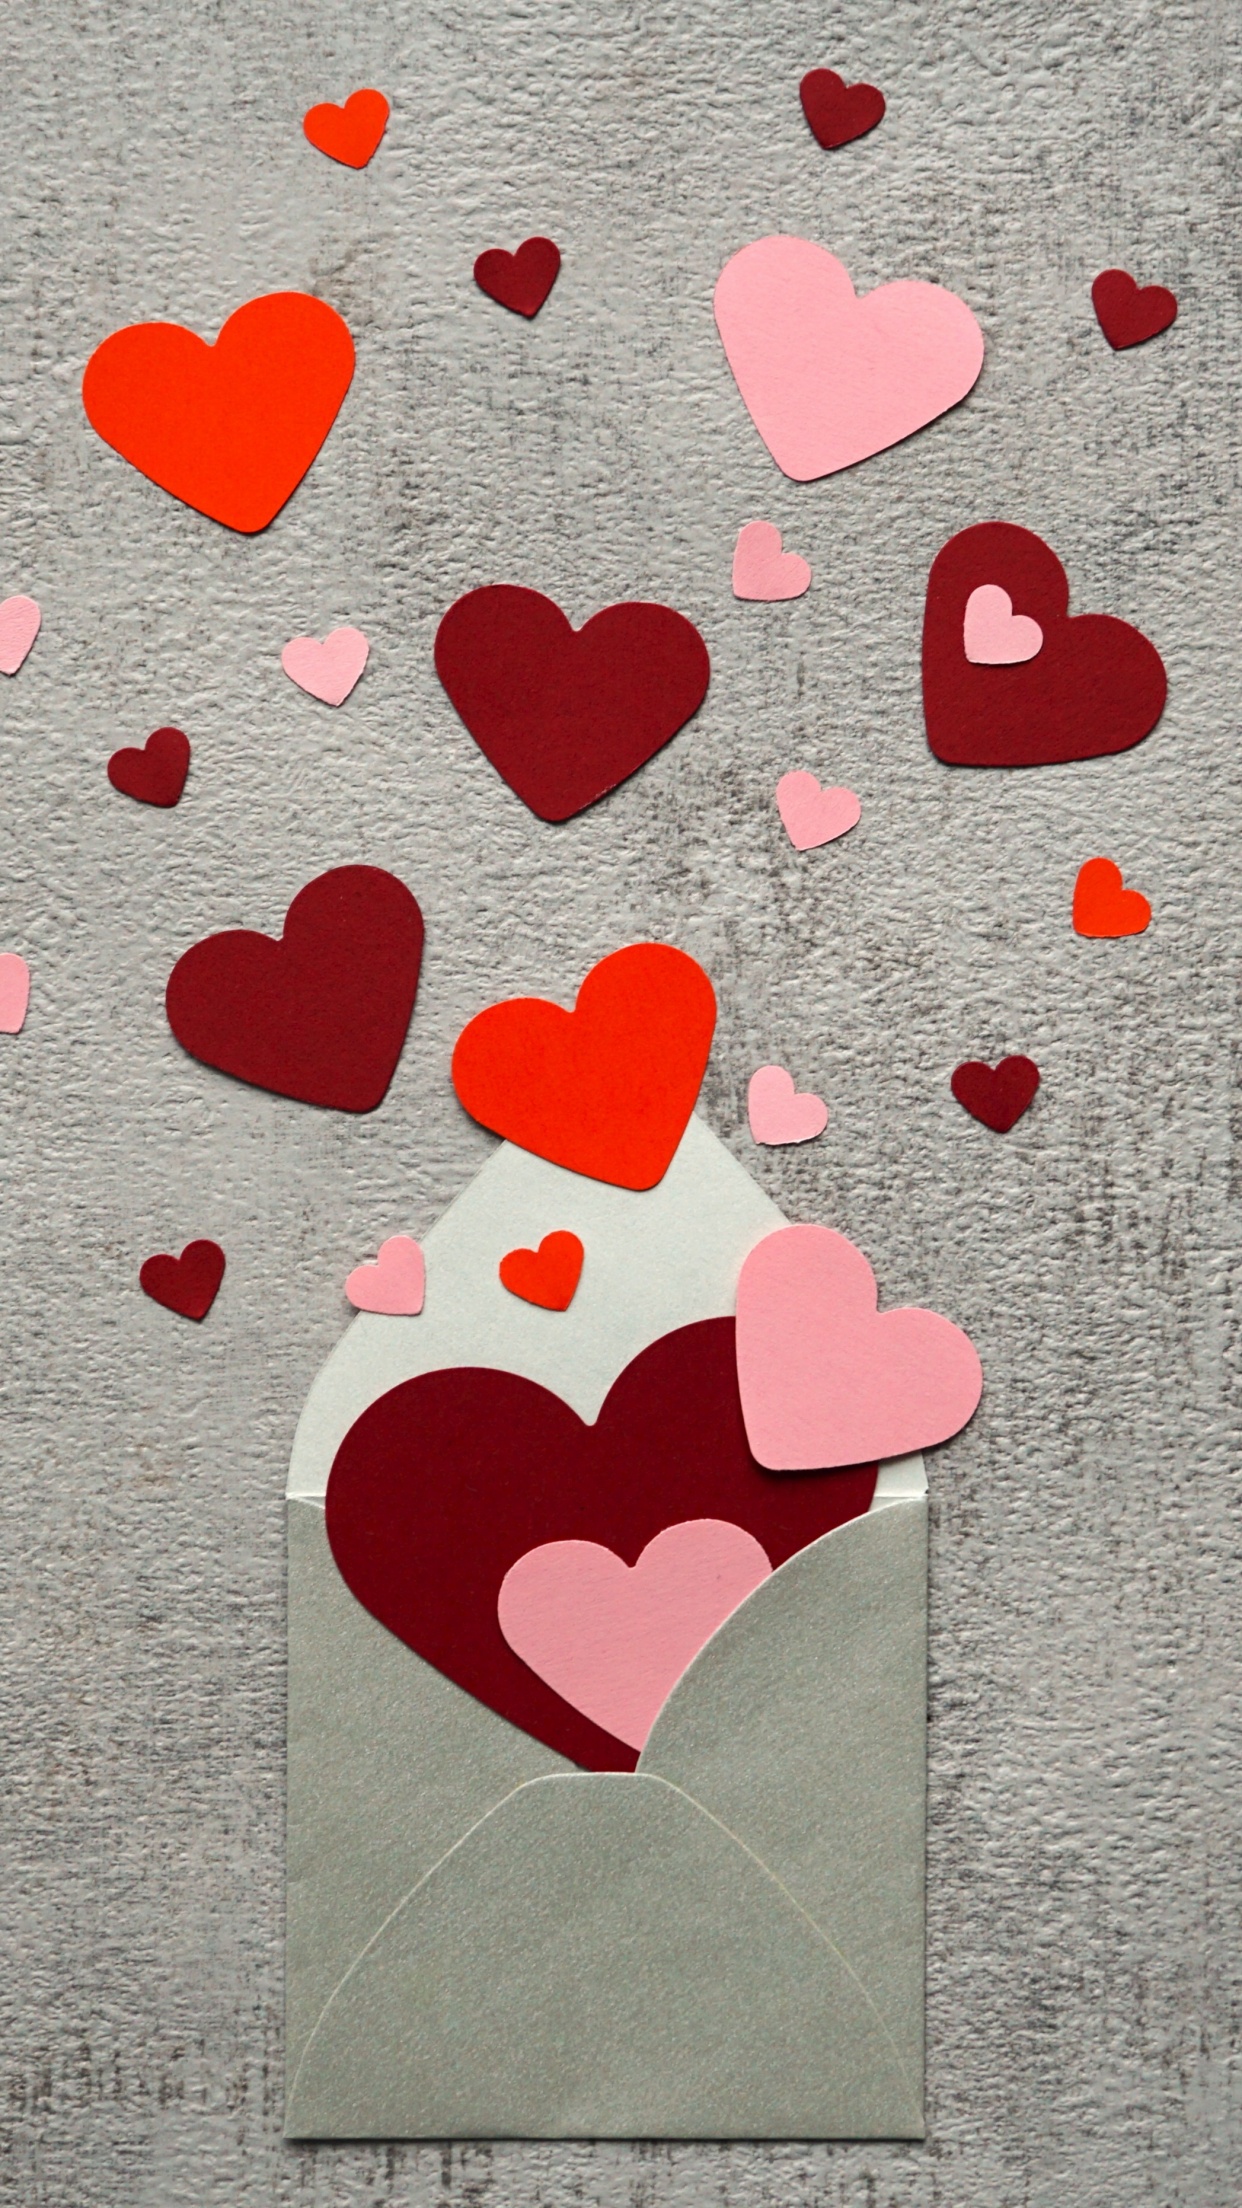 Red hearts Wallpaper 4K, Paper hearts, Love, #8908